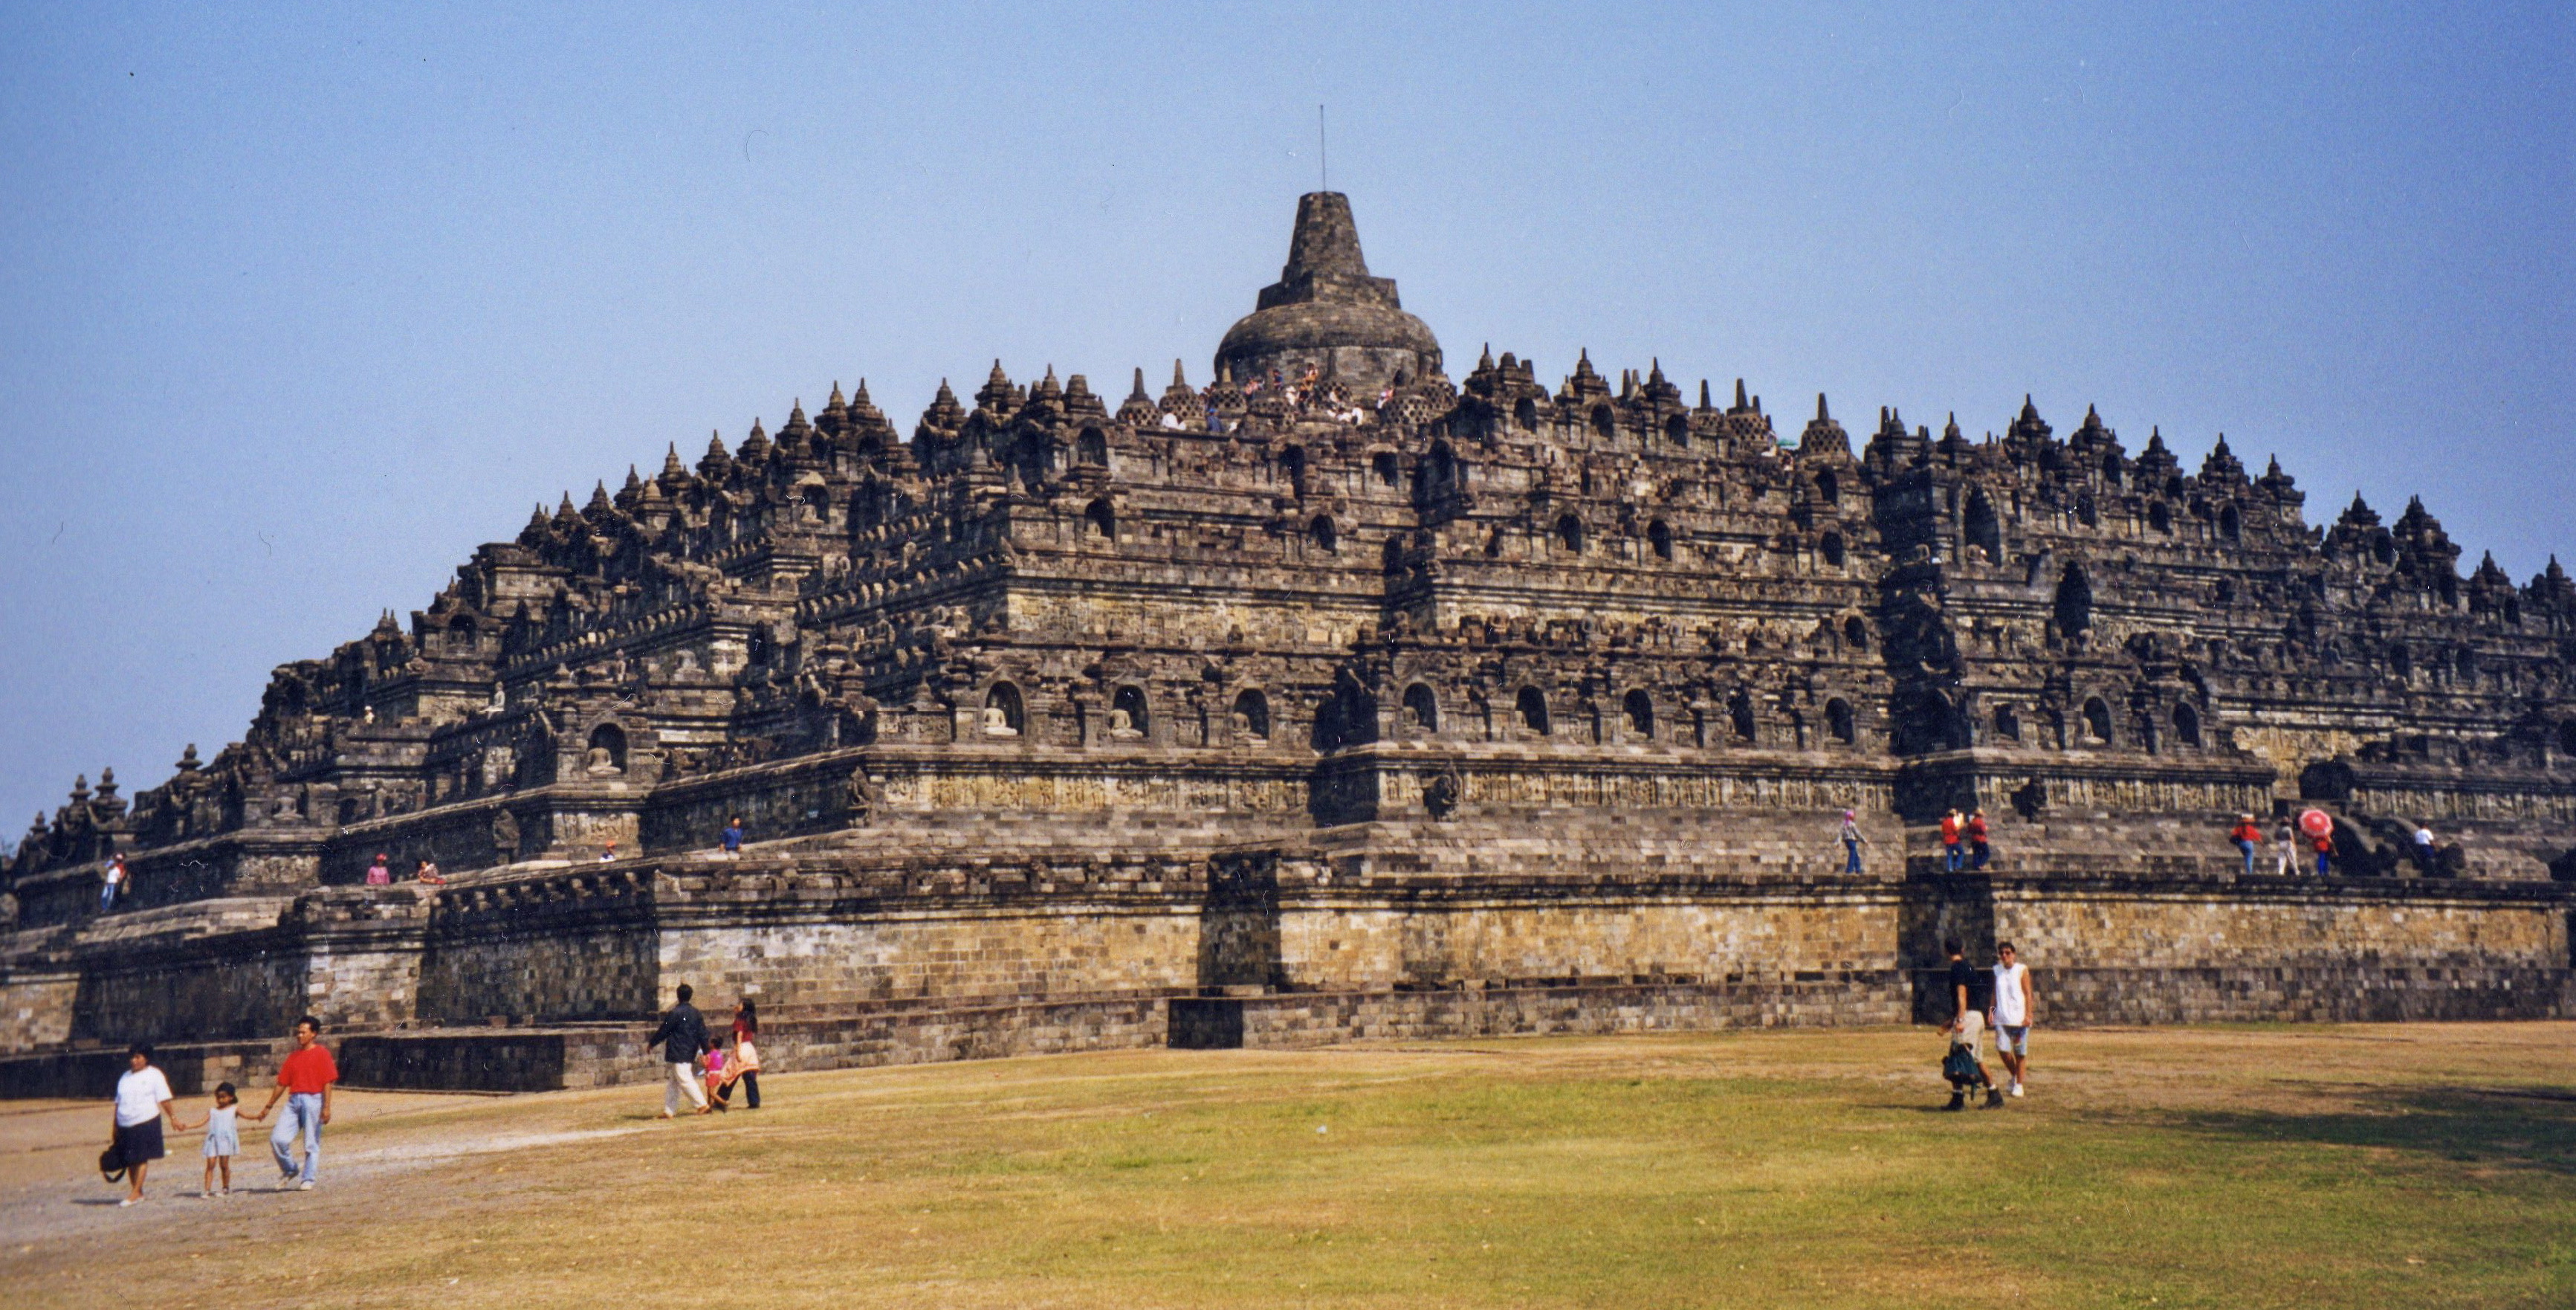 A-Z April Challenge – B For Borobudur In Indonesia